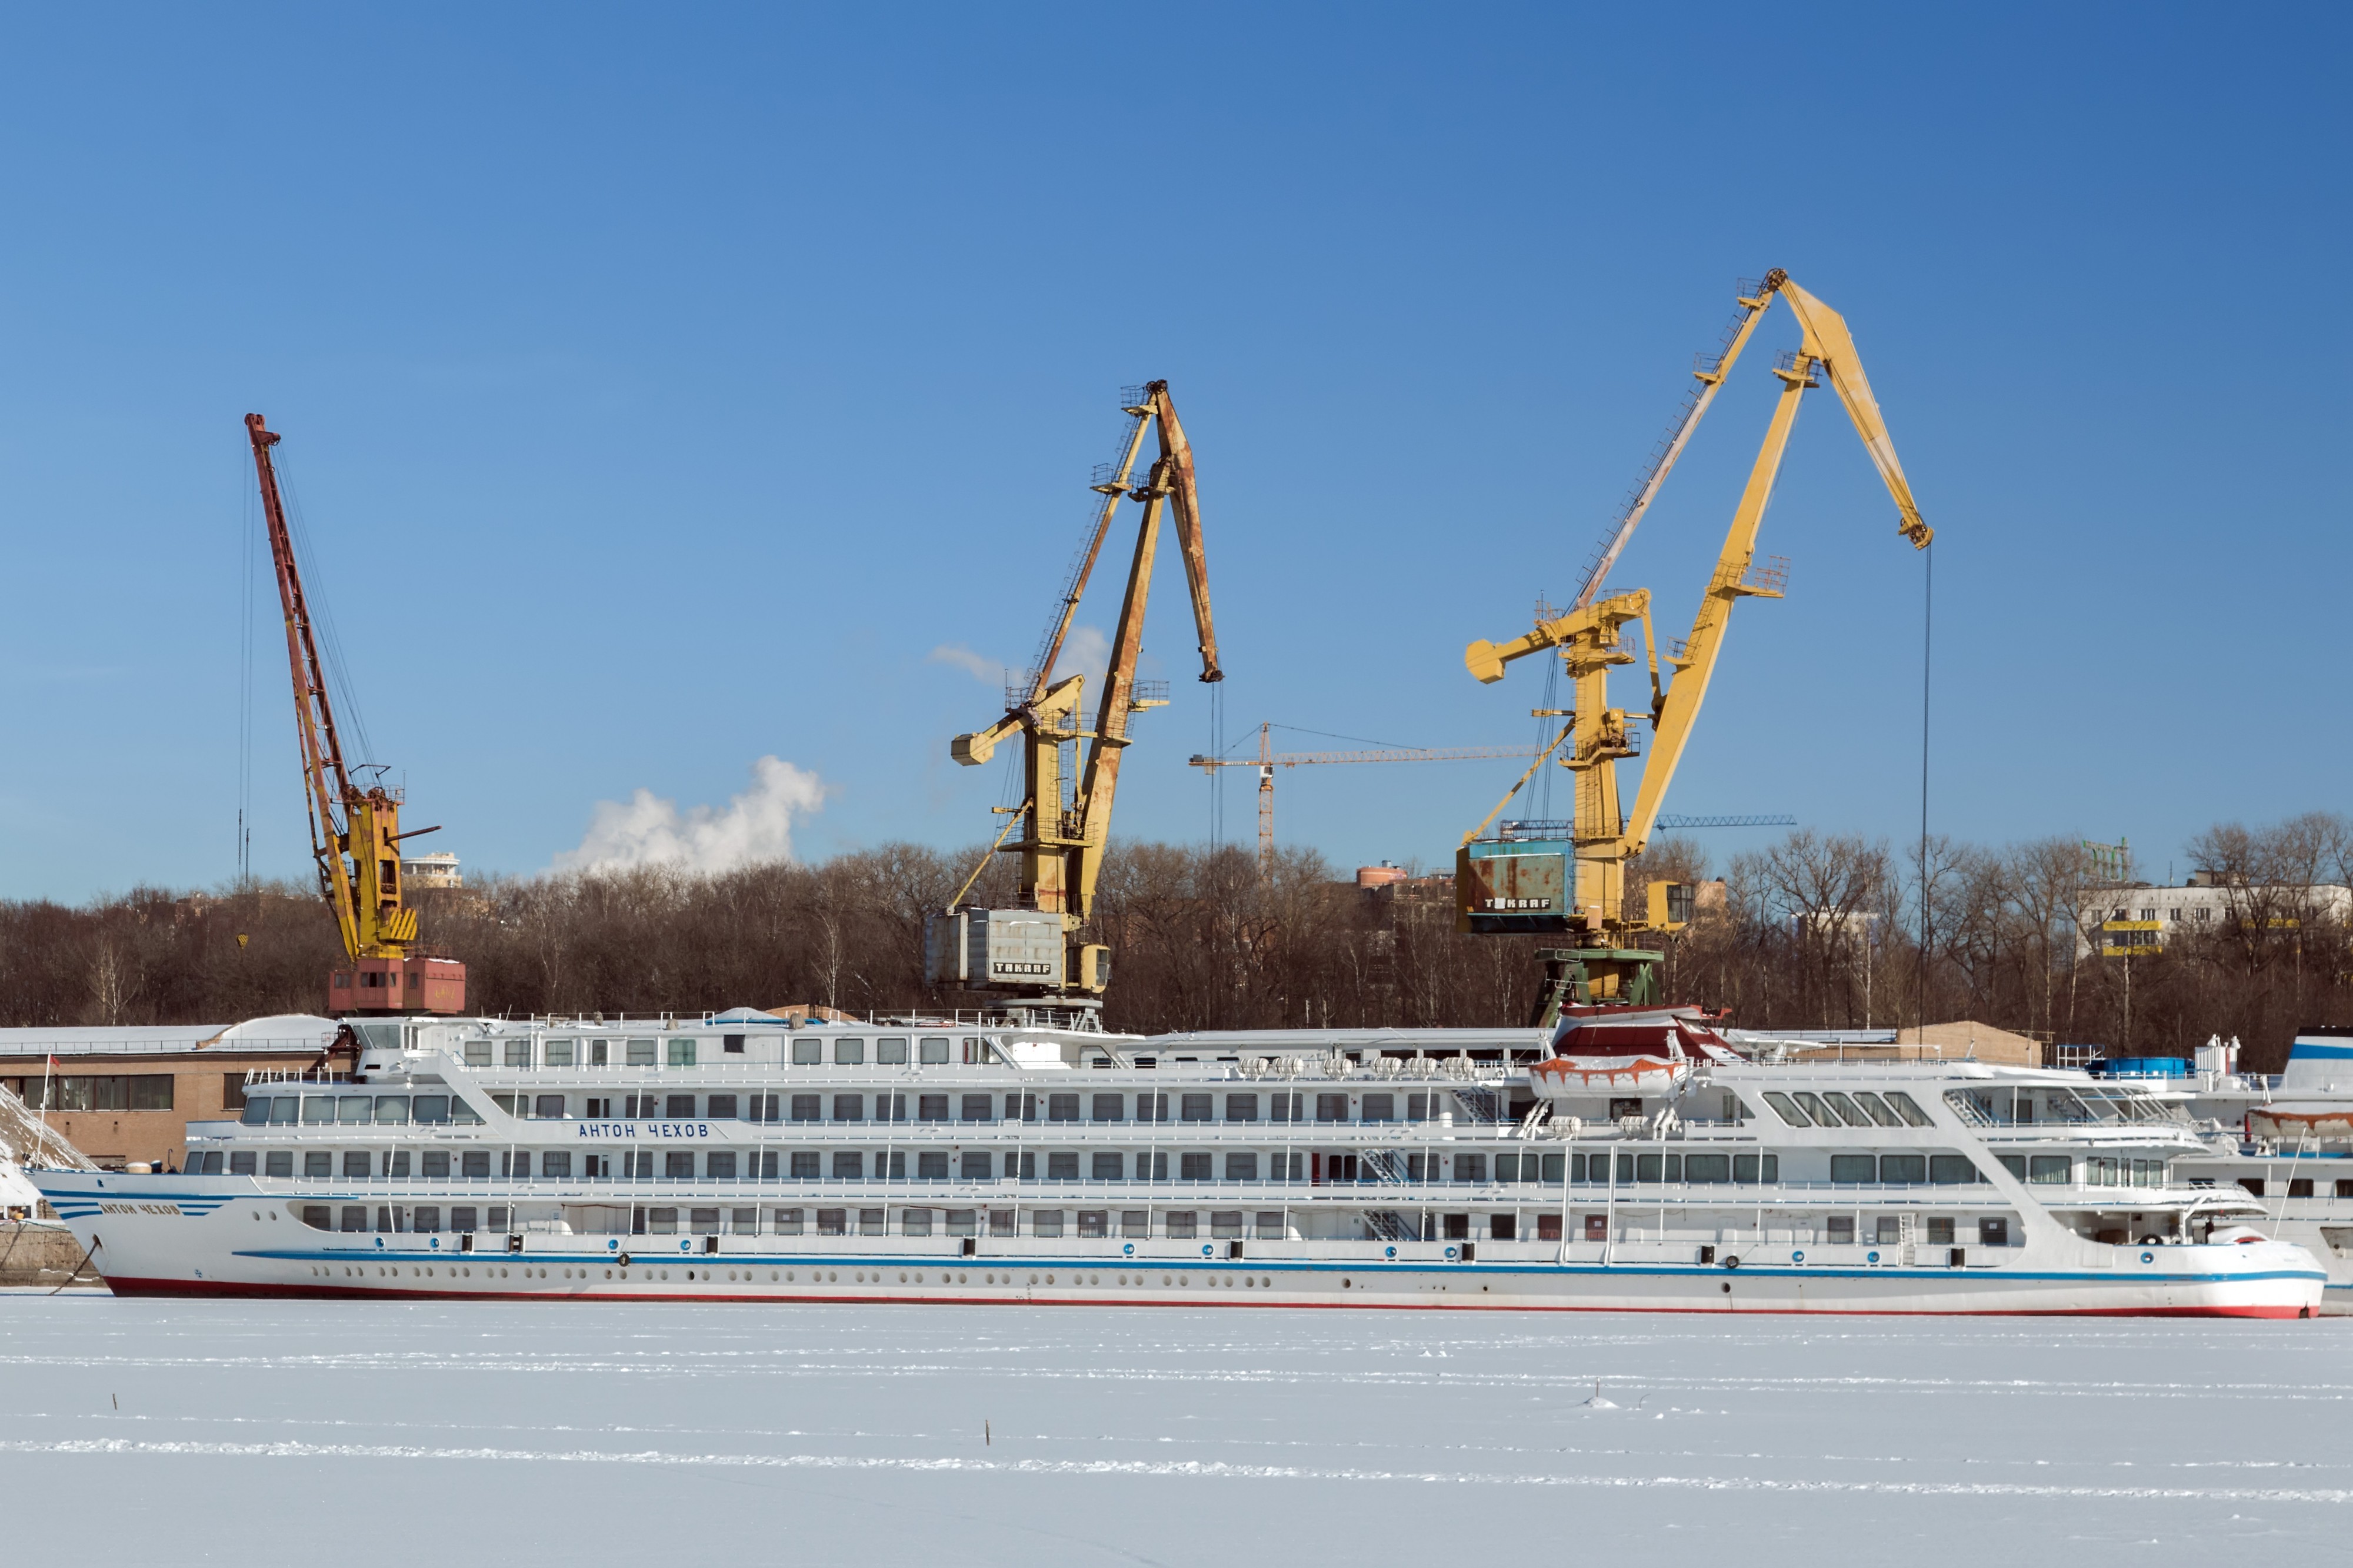 Anton Chekhov in Winter at Moscow North River Port Port View 10-feb-2015 02